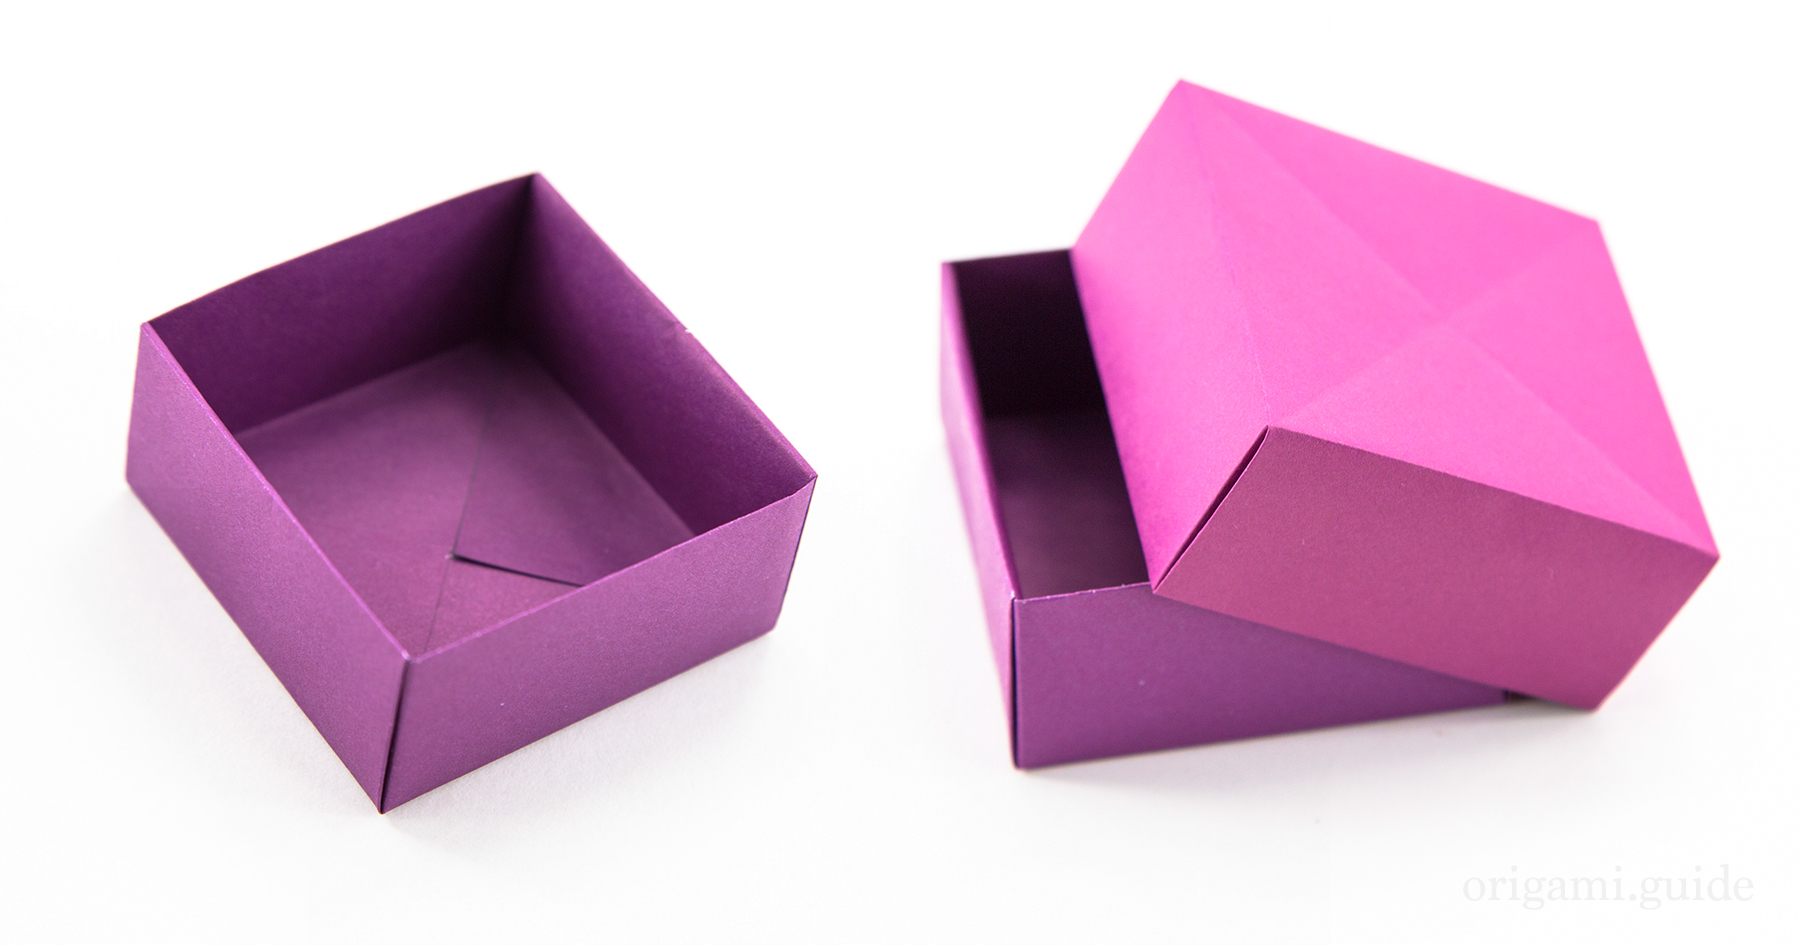 How To Make An Origami Masu Box | Origami Guide - Part 2